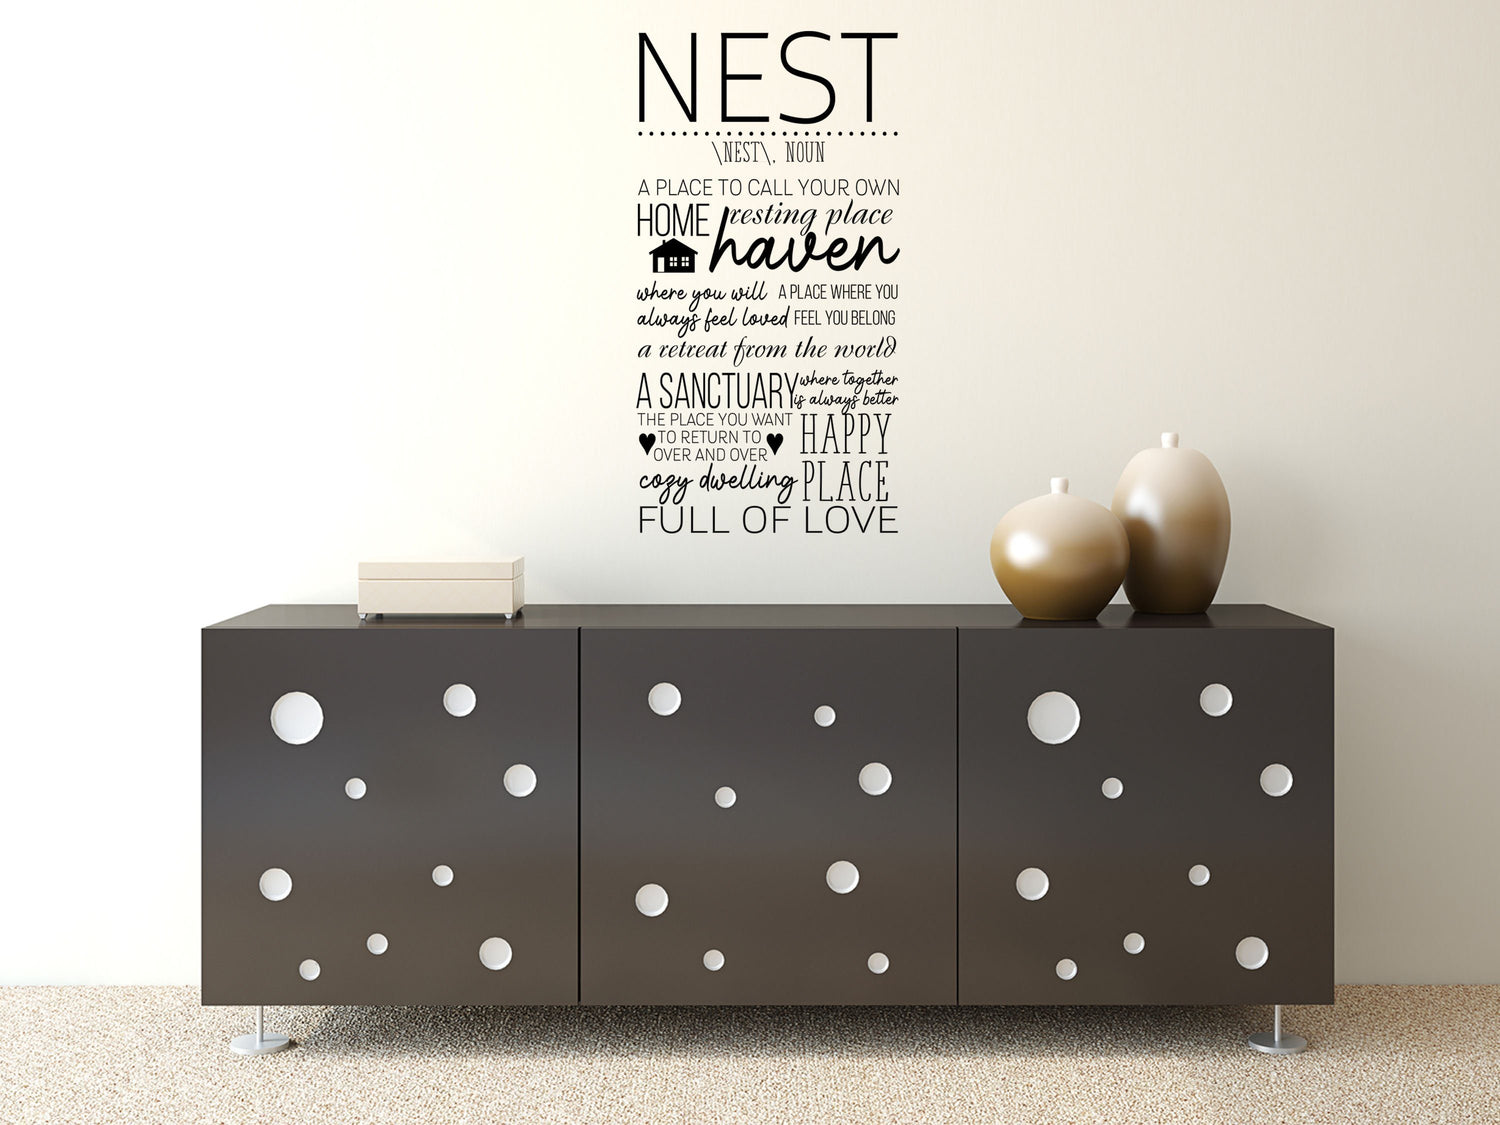 Nest Wall Decal - Nest Vinyl Decal - Nest Wall Decal - Cute Home Decor - Nest Definition Decal Vinyl Wall Decal Done 